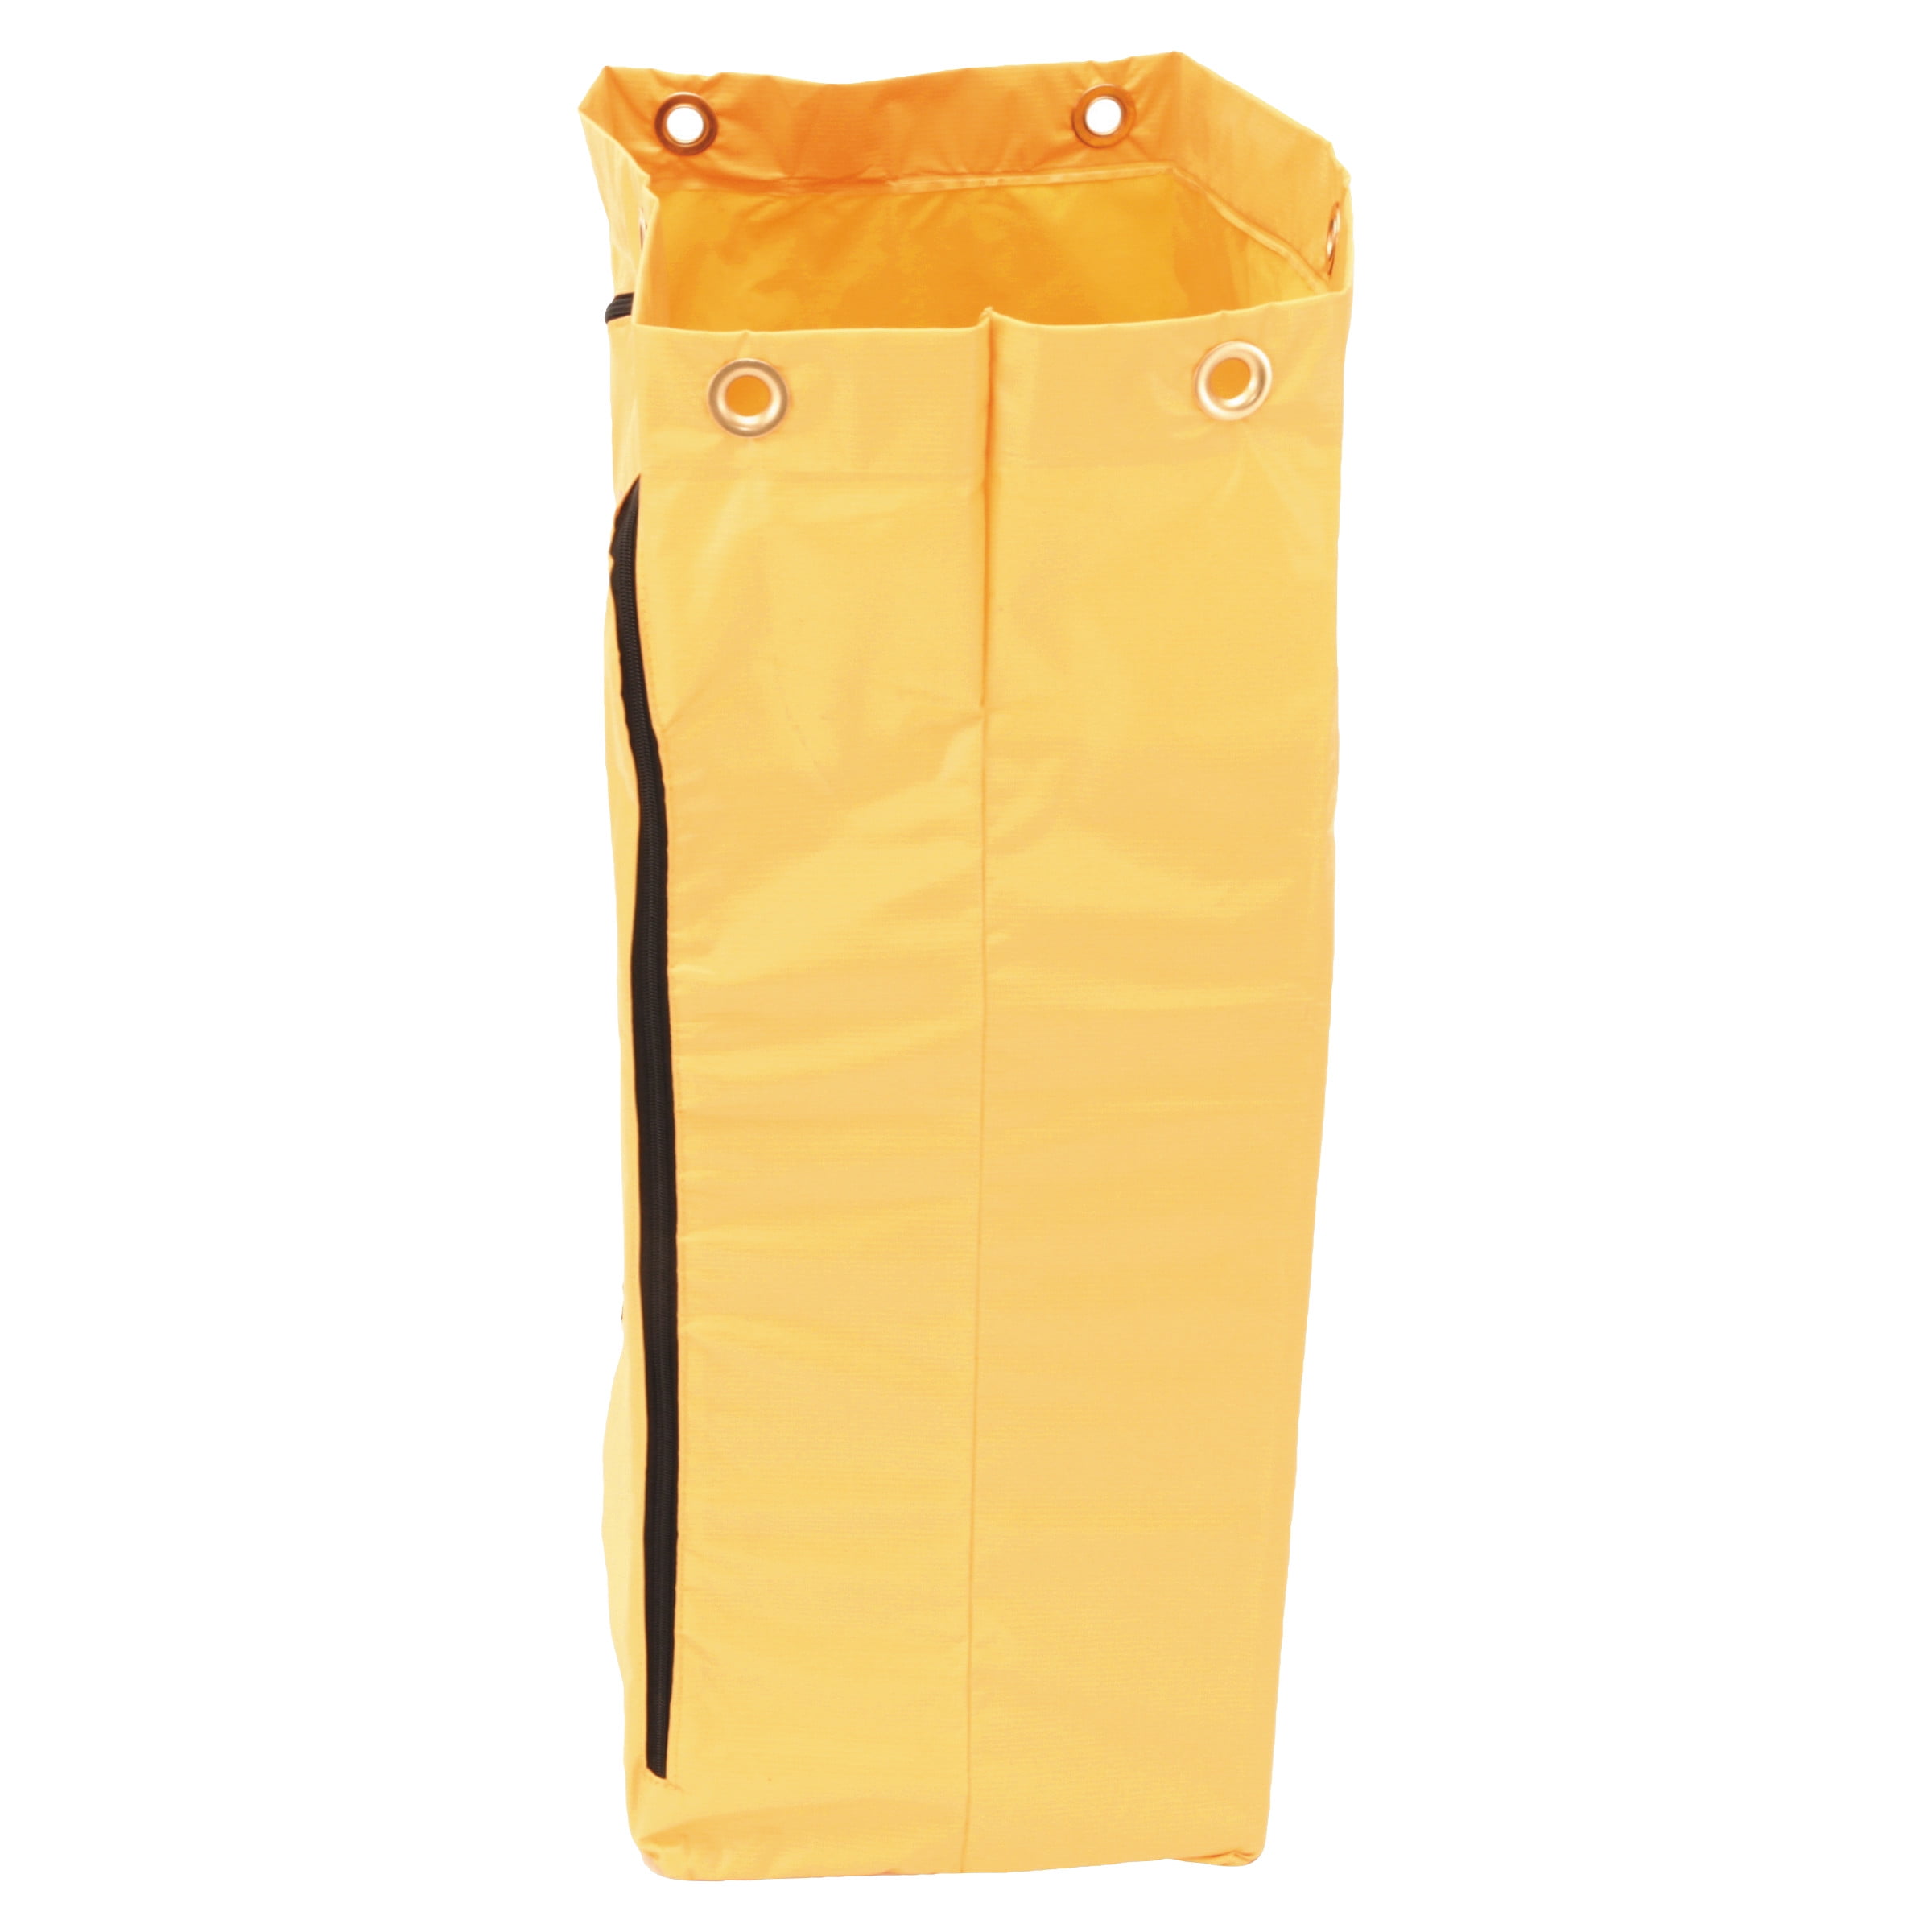 Zoom Supply Rubbermaid 6183 Cart Bag Way Longer Commercial-Grade Rubbermaid Trash Cart Bag Rugged Yellow Vinyl Rubbermaid Cleaning Cart Bag Unlike Whimpy Cheapies This Lasts Way 